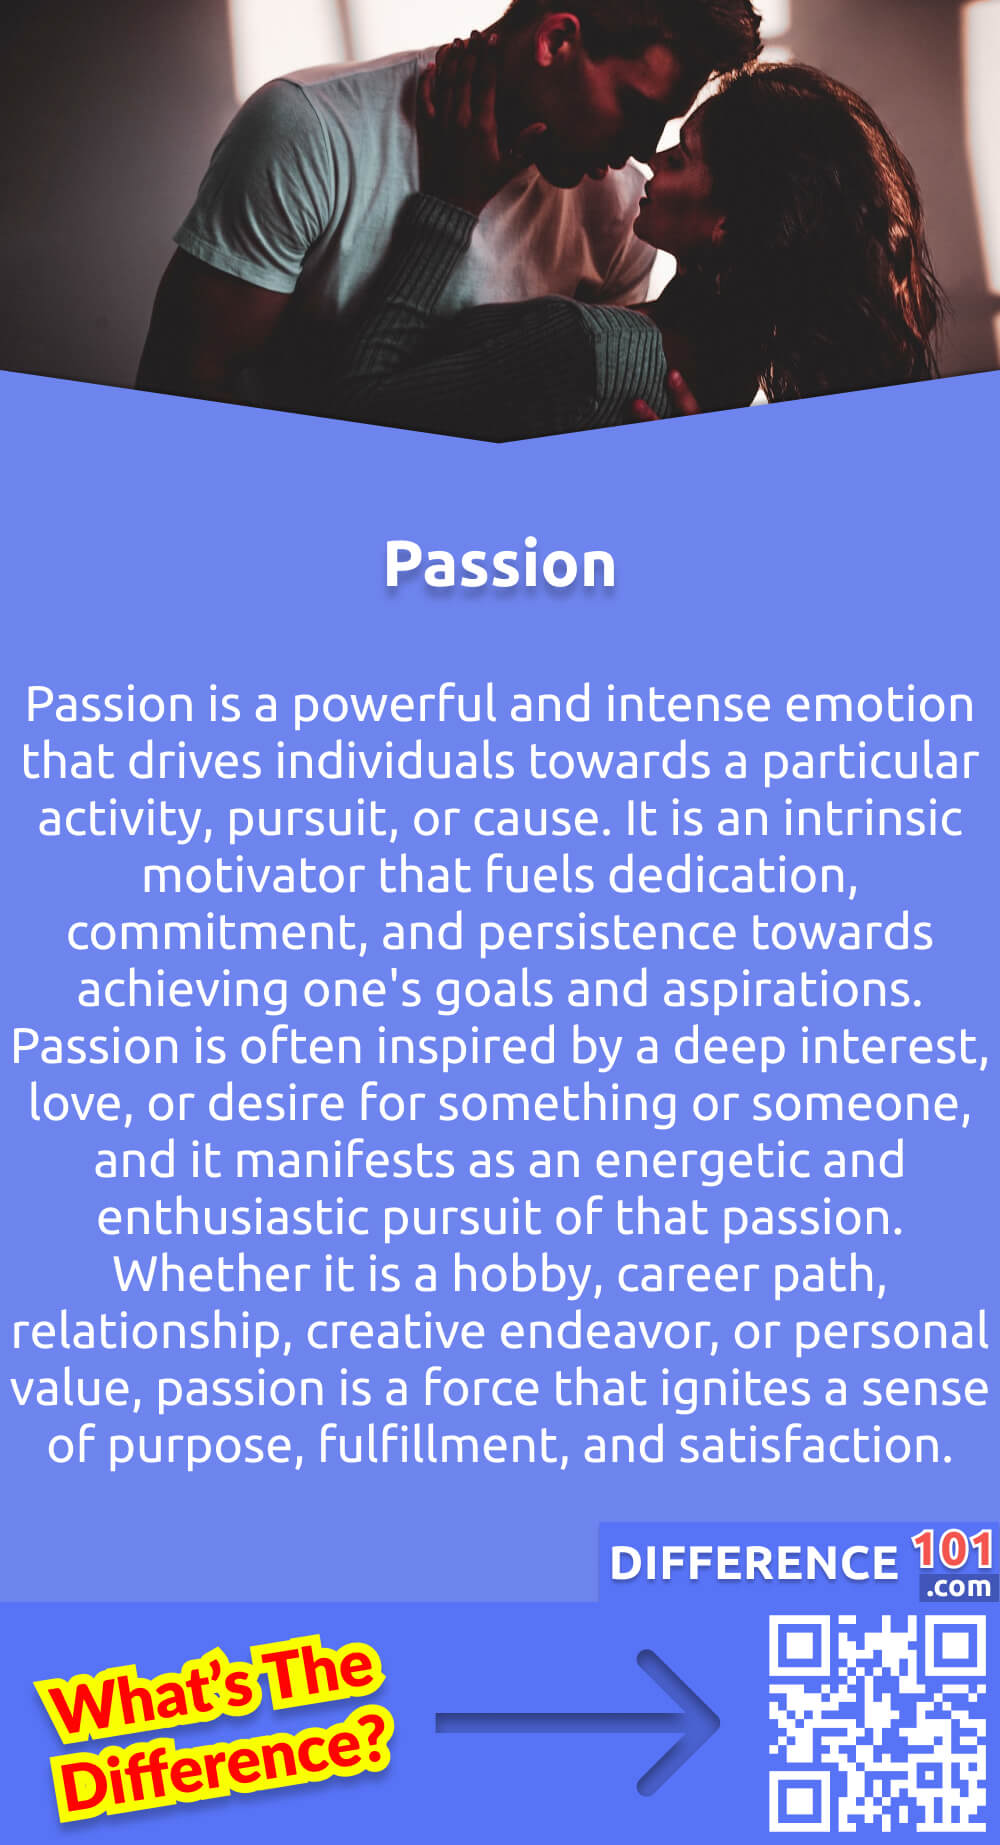 What Is Passion? Passion is a powerful and intense emotion that drives individuals towards a particular activity, pursuit, or cause. It is an intrinsic motivator that fuels dedication, commitment, and persistence towards achieving one's goals and aspirations. Passion is often inspired by a deep interest, love, or desire for something or someone, and it manifests as an energetic and enthusiastic pursuit of that passion. Whether it is a hobby, career path, relationship, creative endeavor, or personal value, passion is a force that ignites a sense of purpose, fulfillment, and satisfaction. When individuals engage in activities aligned with their passion, they experience a sense of joy and contentment that is unmatched by any other emotion.